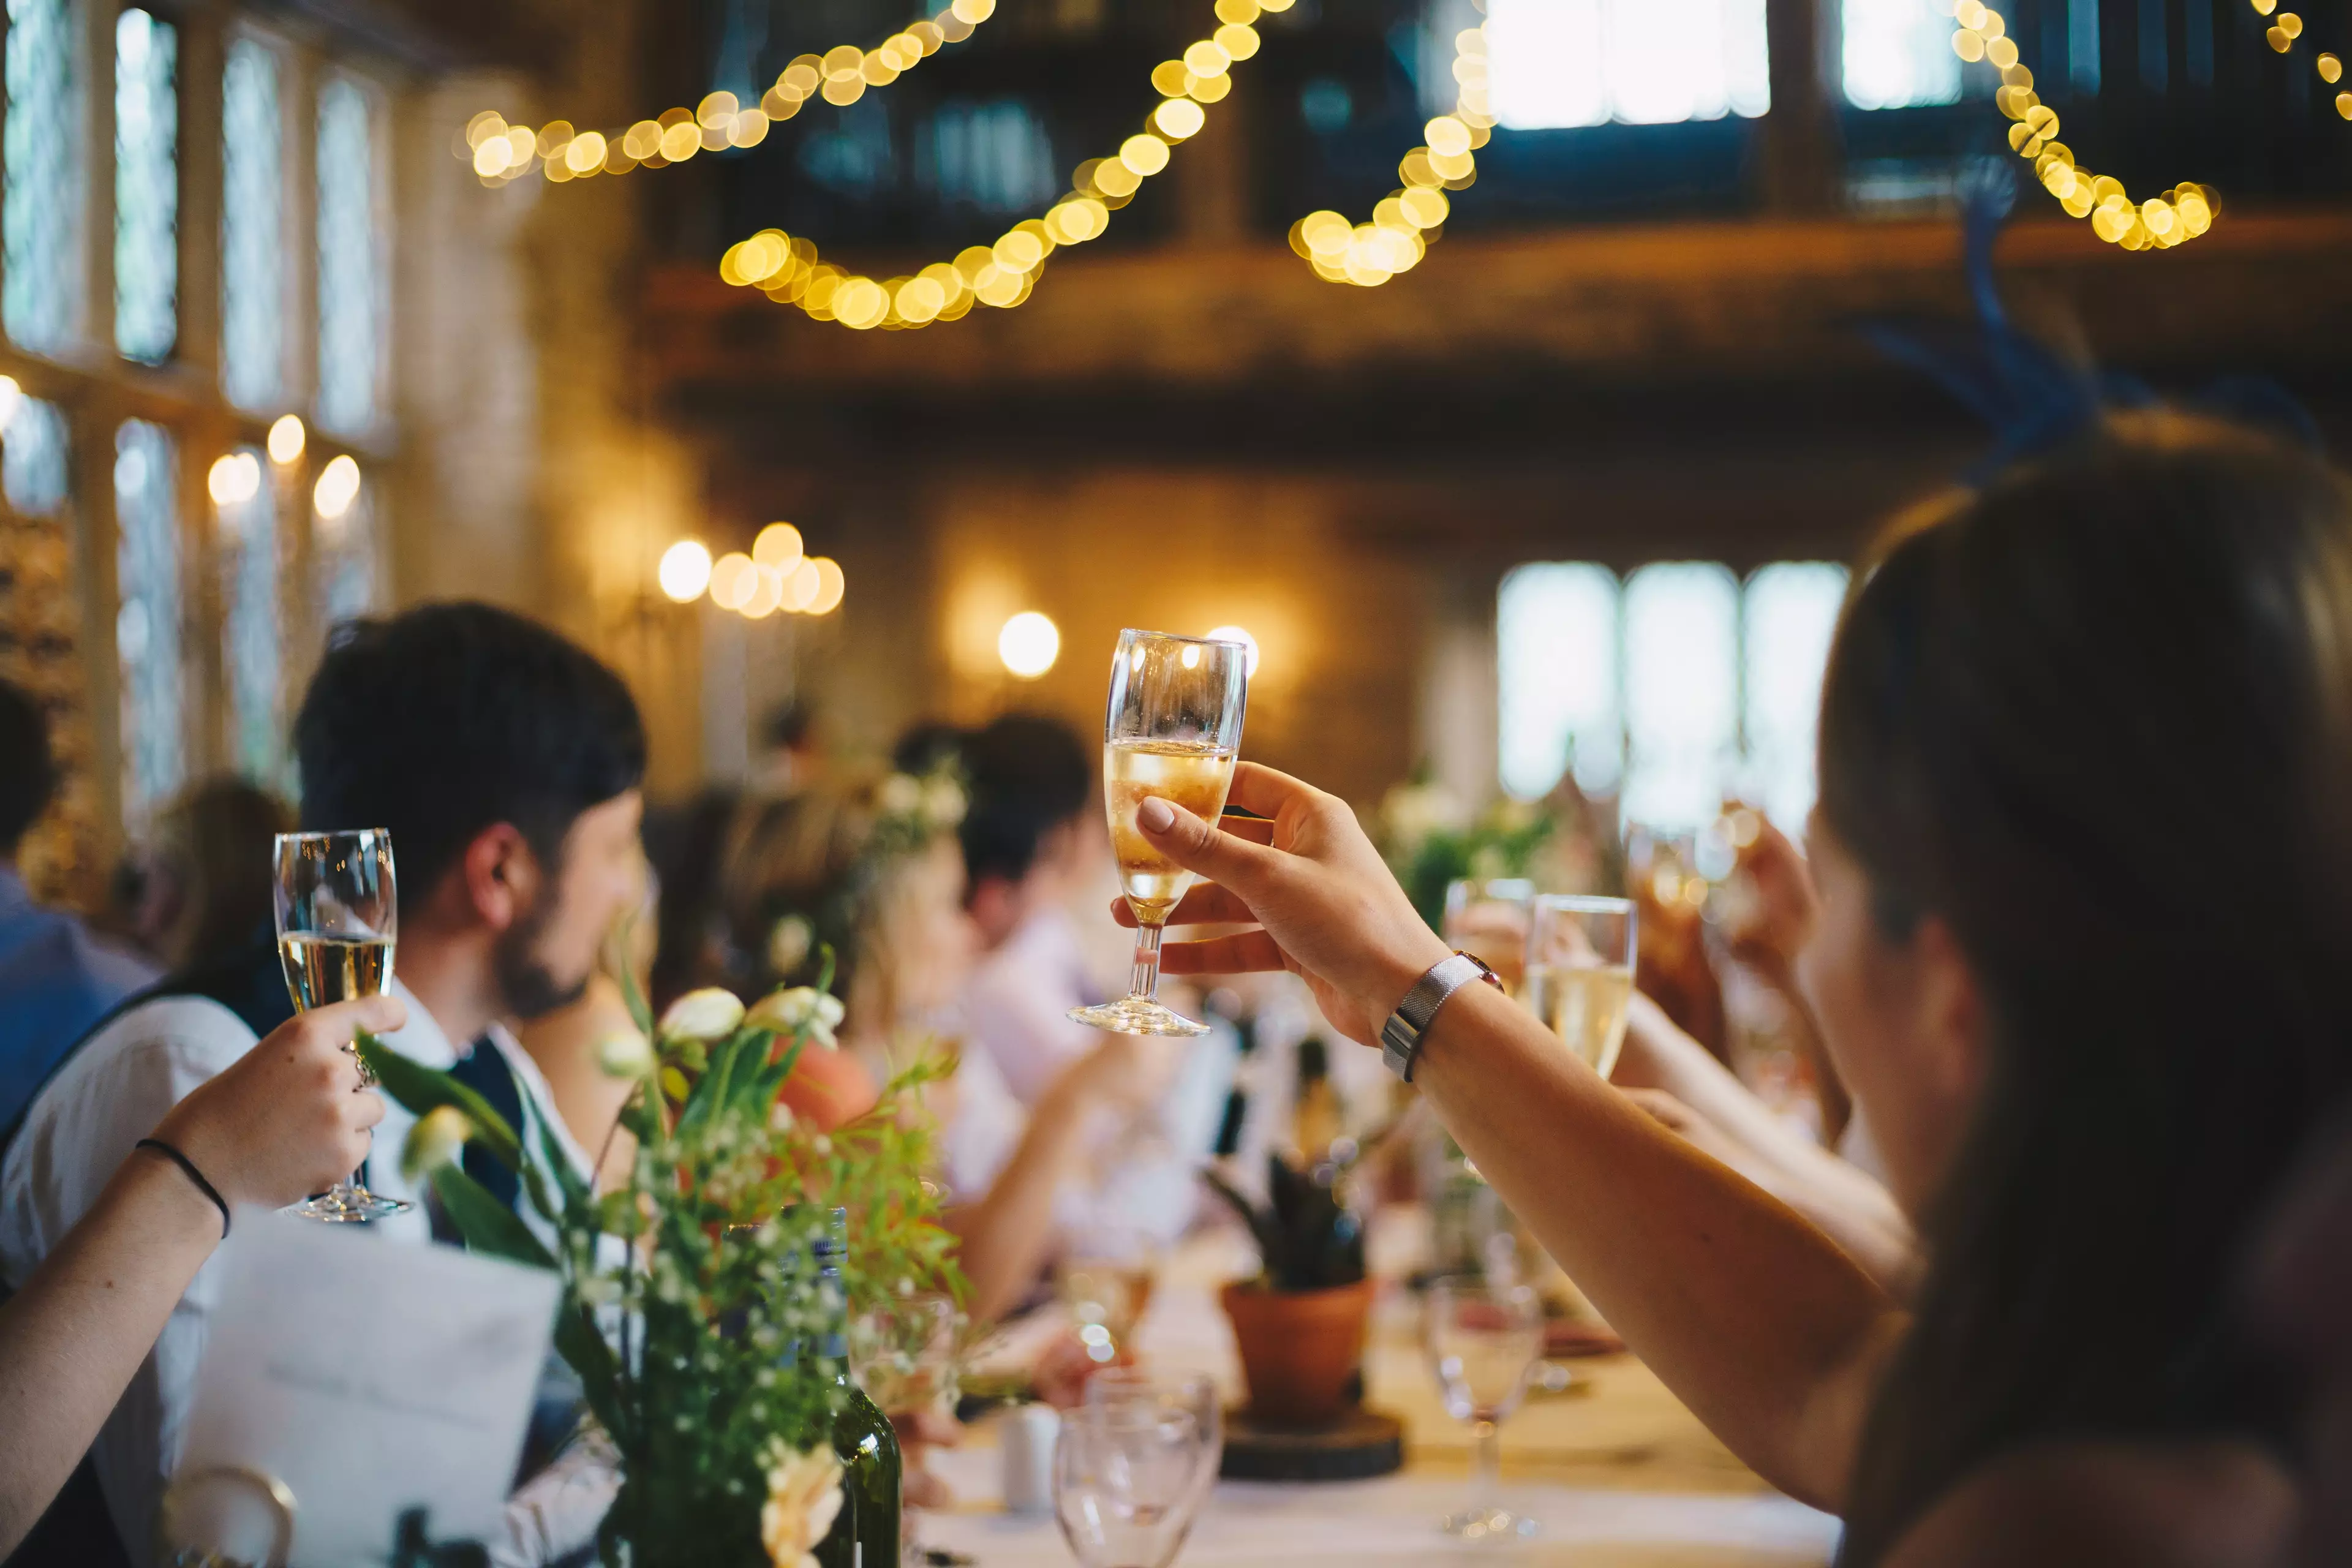 Wedding receptions are now strongly advised against (